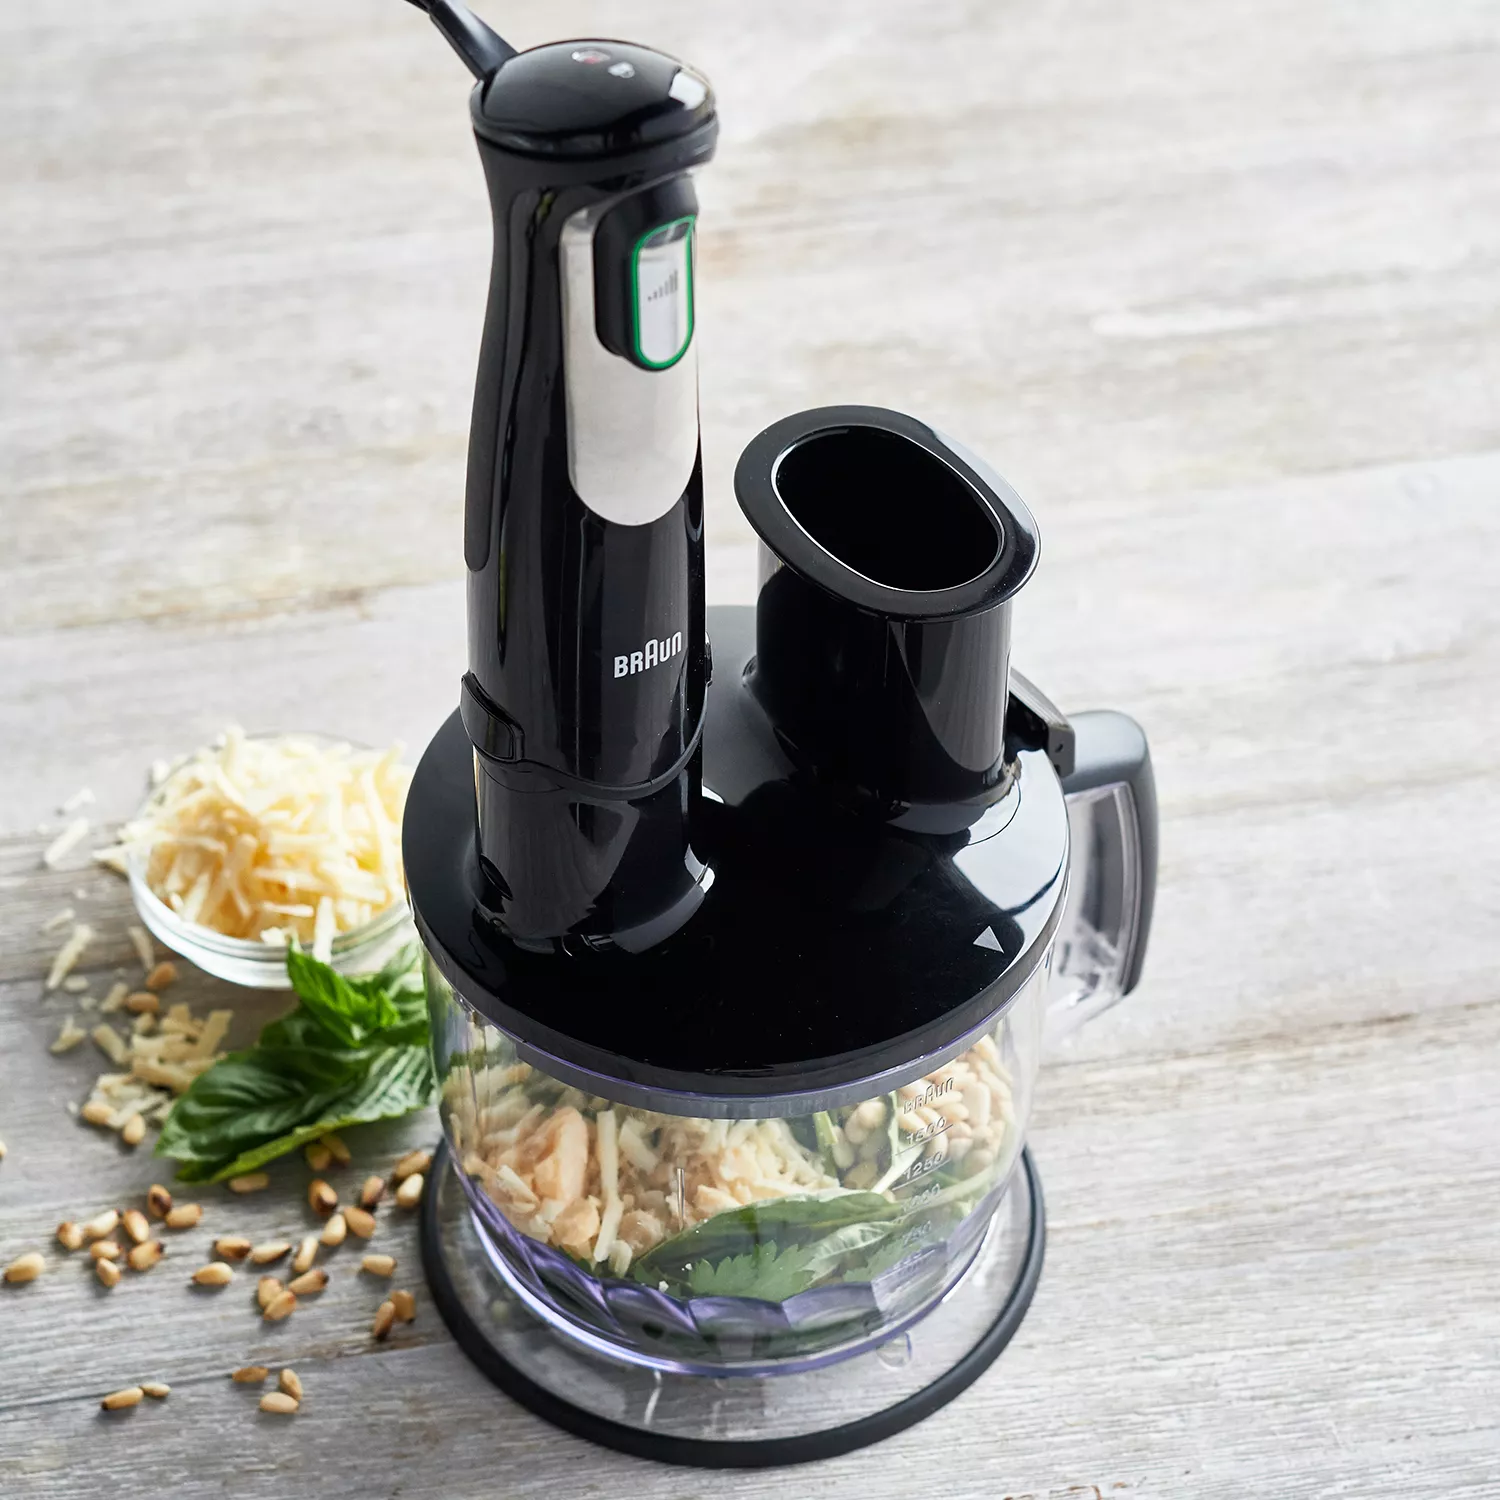 Lunch is Served: We Set the Braun MultiQuick 9 Hand Blender the